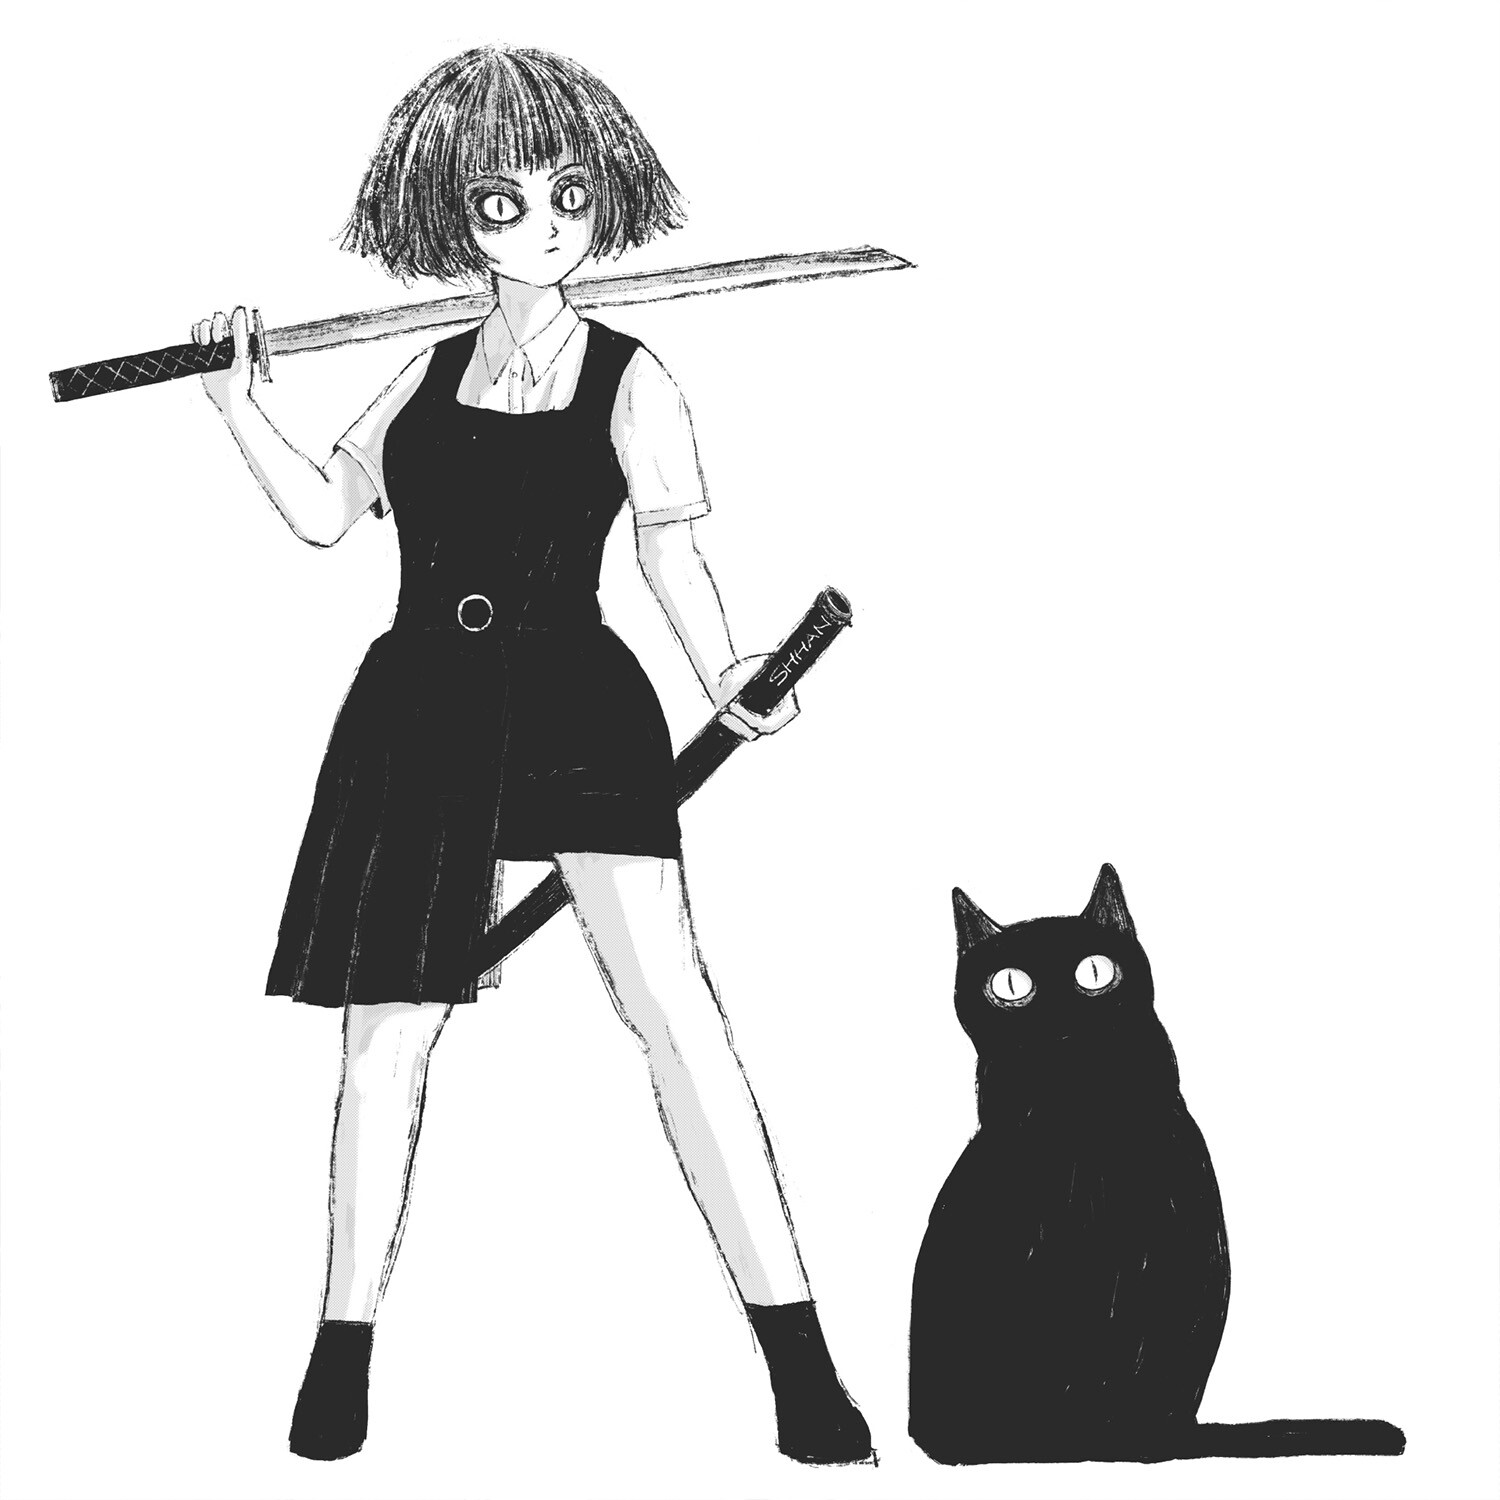 The Black Cat and the Girl